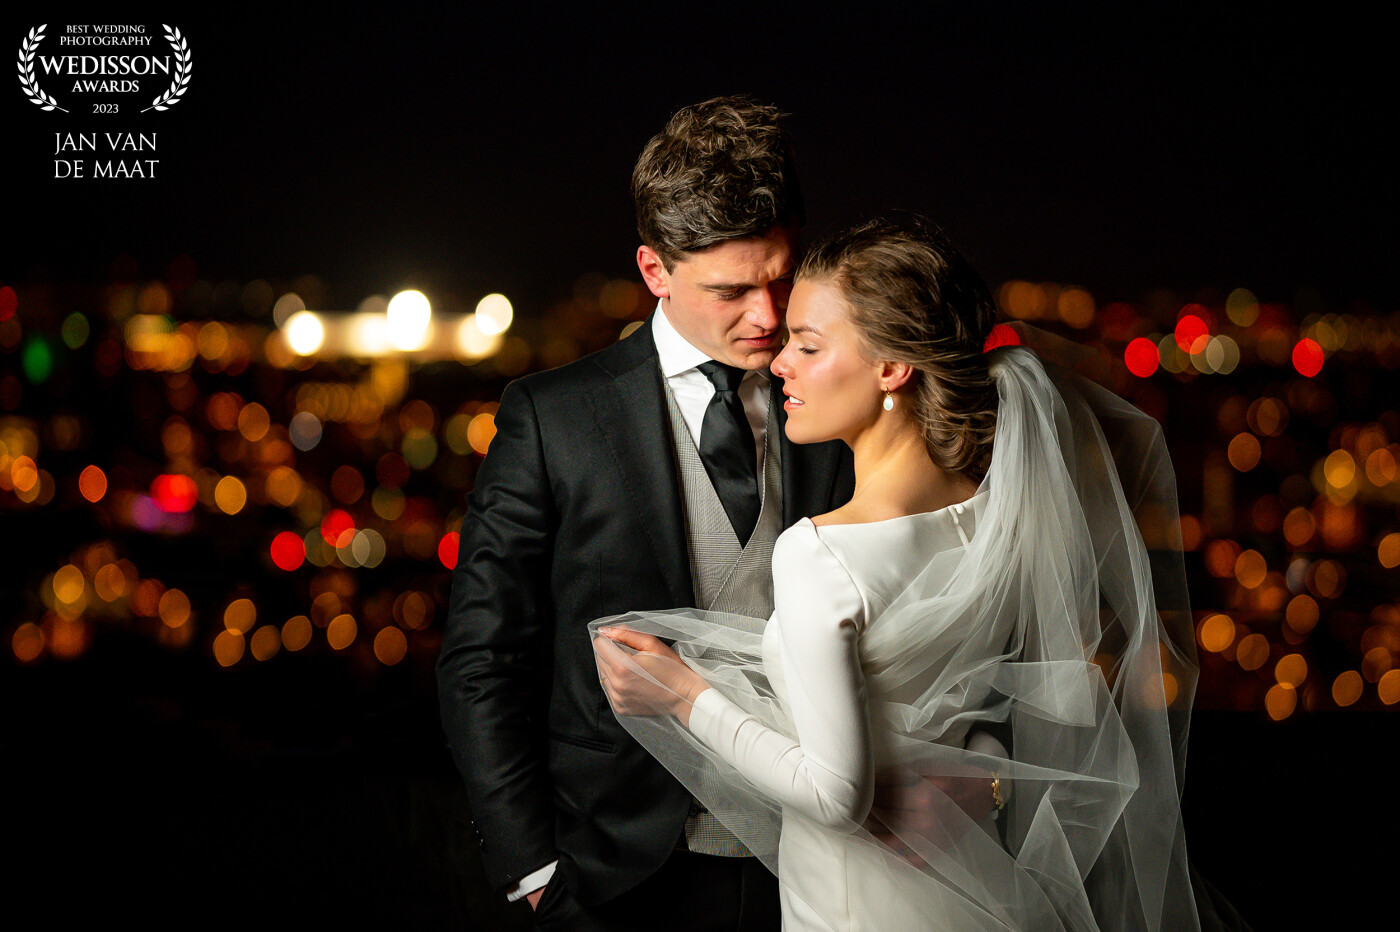 My first night scene on the rooftop! Standing around 100m high at the obsevation deck in cold windy conditions my couple had to be tough but I ended up with this image; a romantic scene with the city lights of Rotterdam on the background!